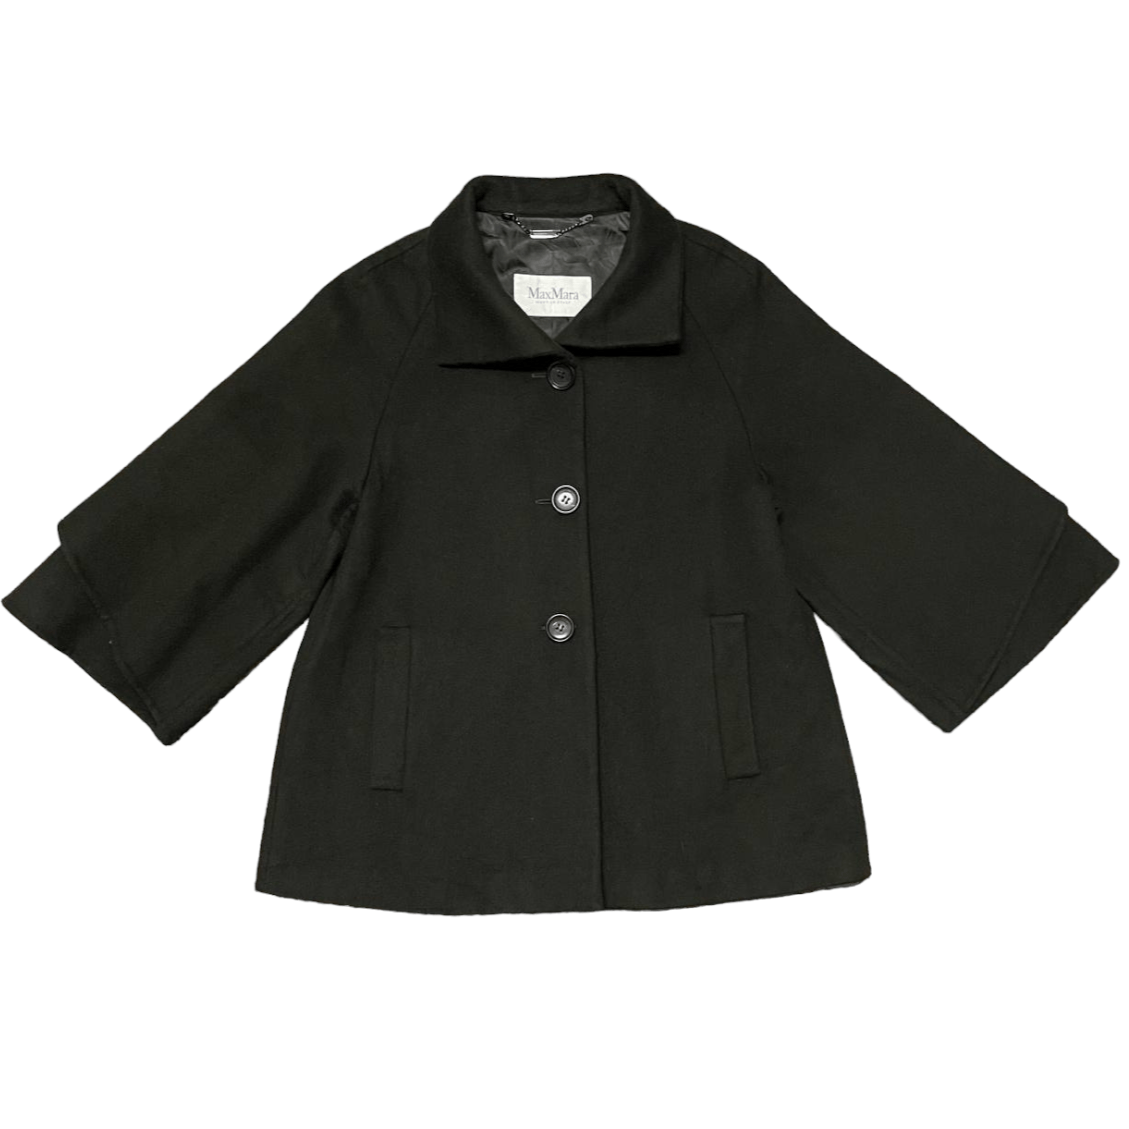 Archival Clothing - Archive Max Mara Made in Italy Wool Coat - 1